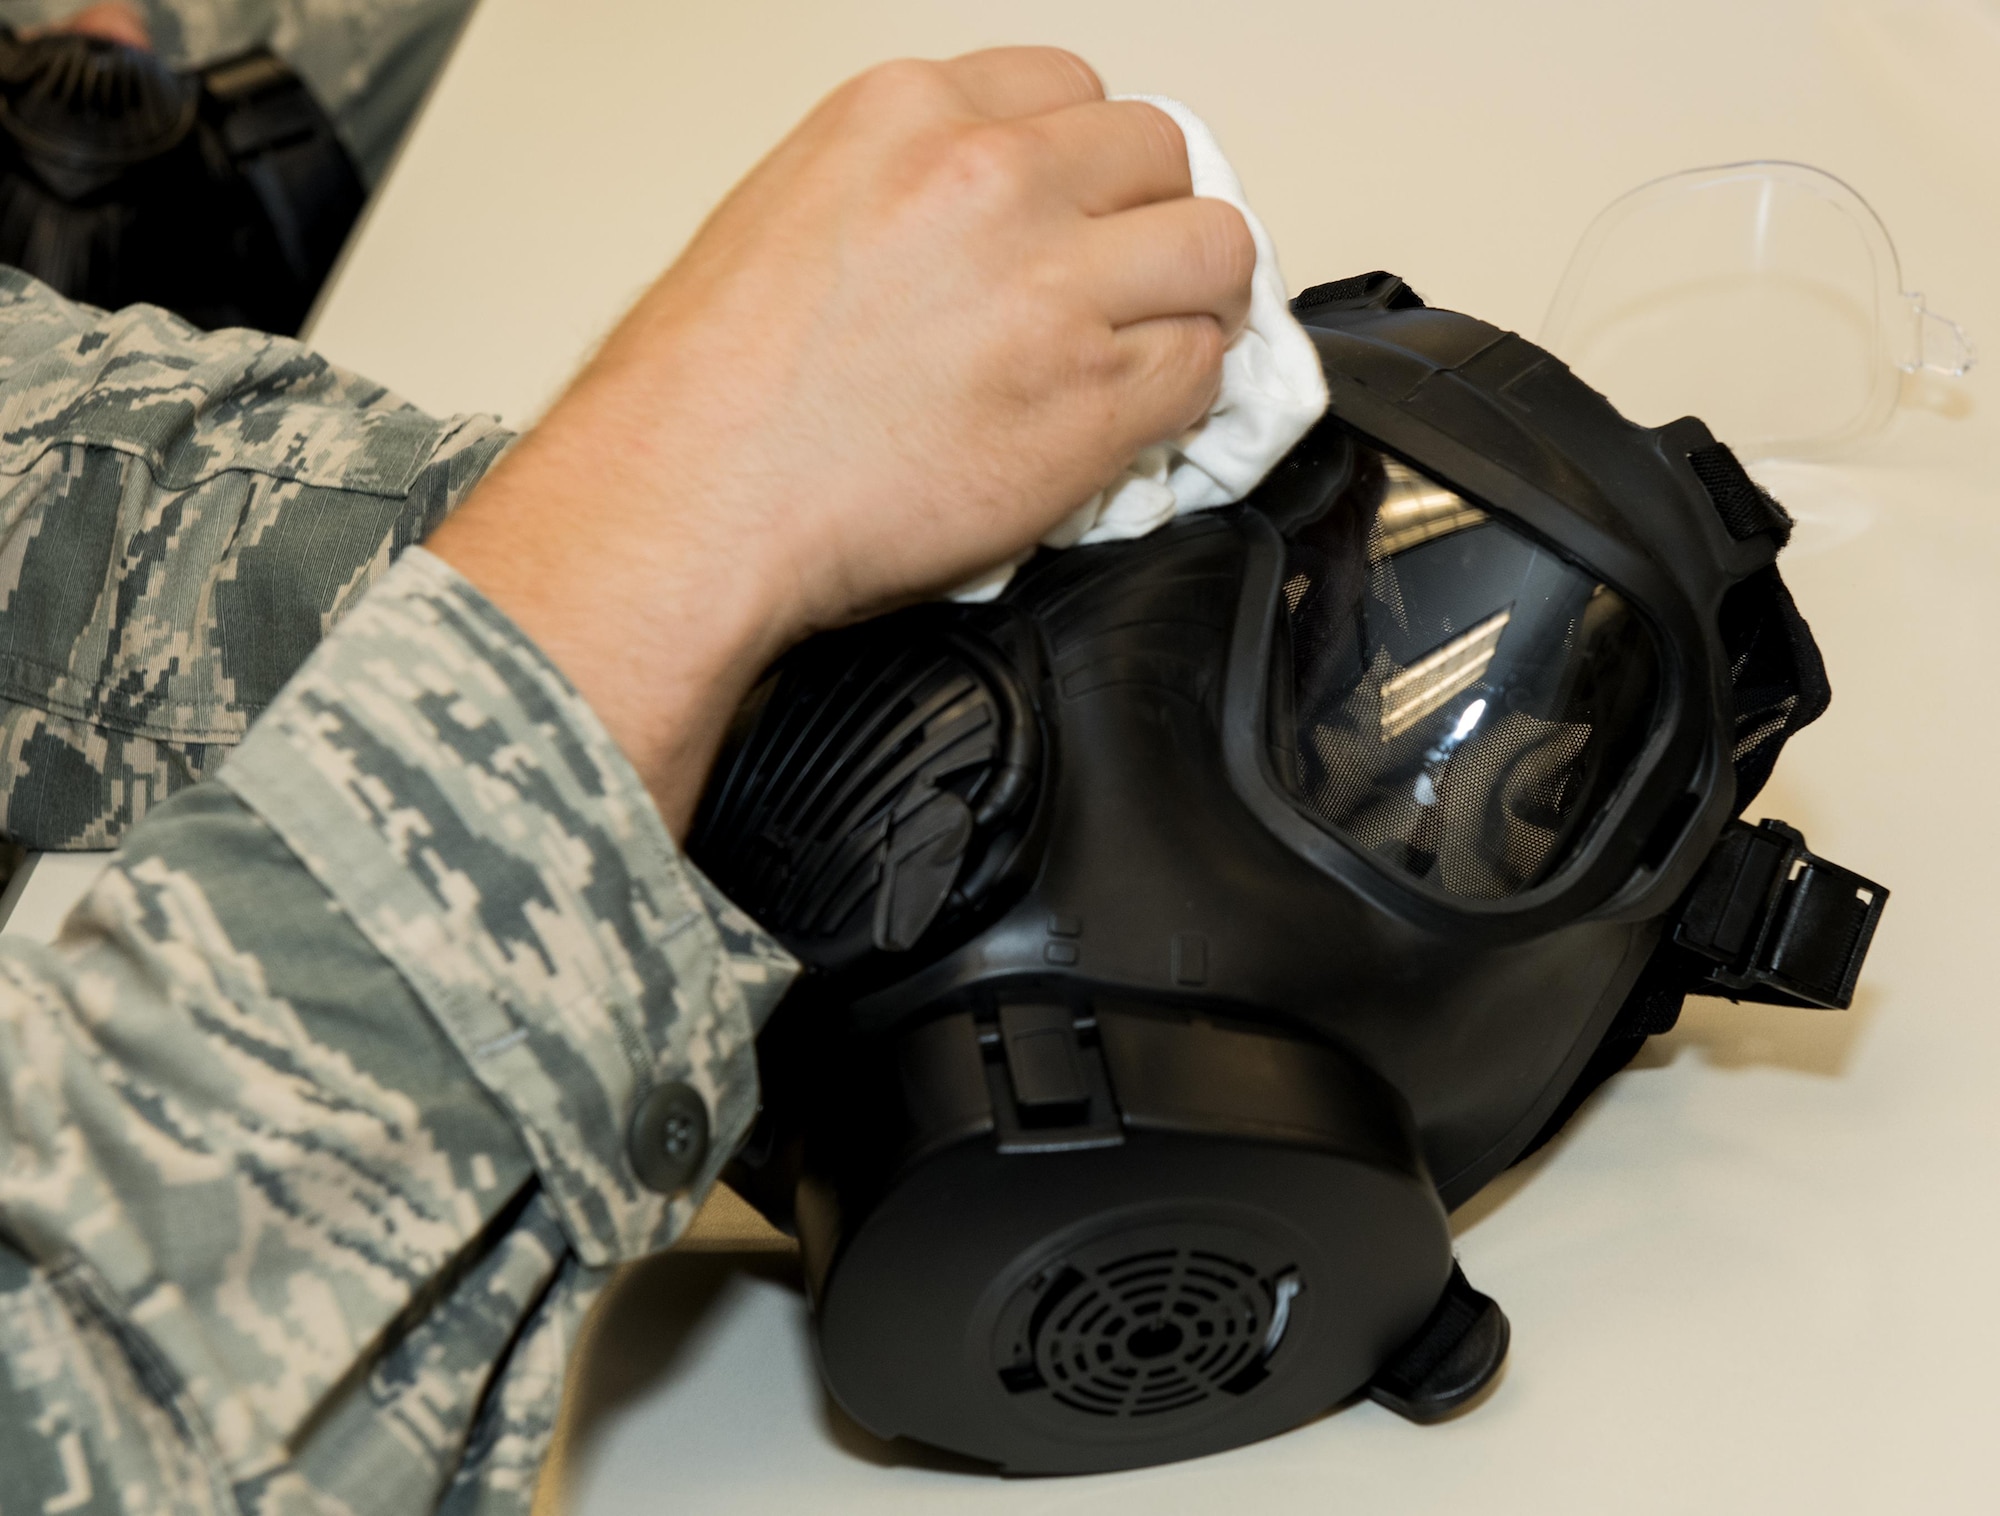 U.S. Air Force Airman cleans the plastic eye piece of a gas mask during a chemical, biological, radiological and nuclear defense survival skills training course on Travis Air Force Base, Calif., Sep. 21, 2017. CBRN defenses are protective measures taken in situations in which chemical, biological, radiological or nuclear warfare (including terrorism) hazards may be present. CBRN defense consists of CBRN passive protection, contamination avoidance and CBRN mitigation. (U.S. Air Force photo by Heide Couch)